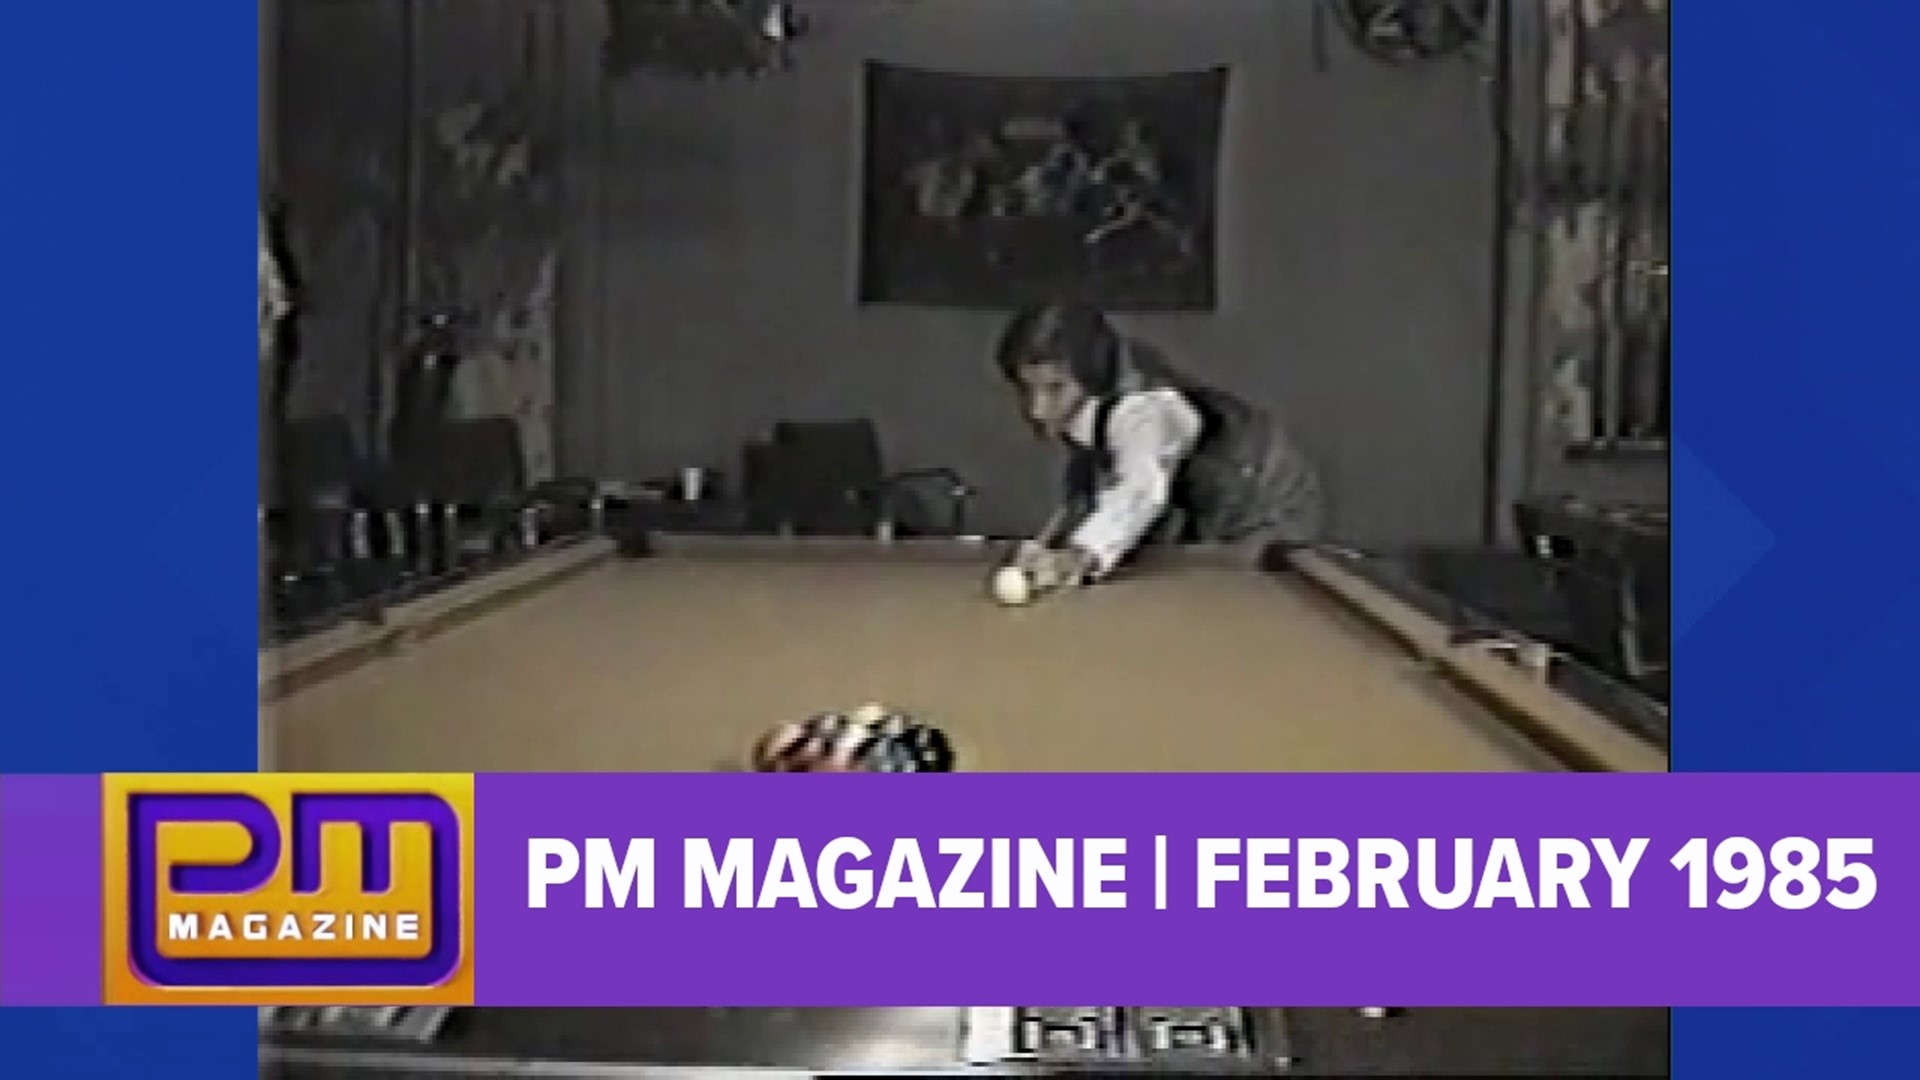 Check out an episode of PM Magazine from 1985 featuring a Scranton Pool Shark, Magnum P.I., broom ball and hibachi.